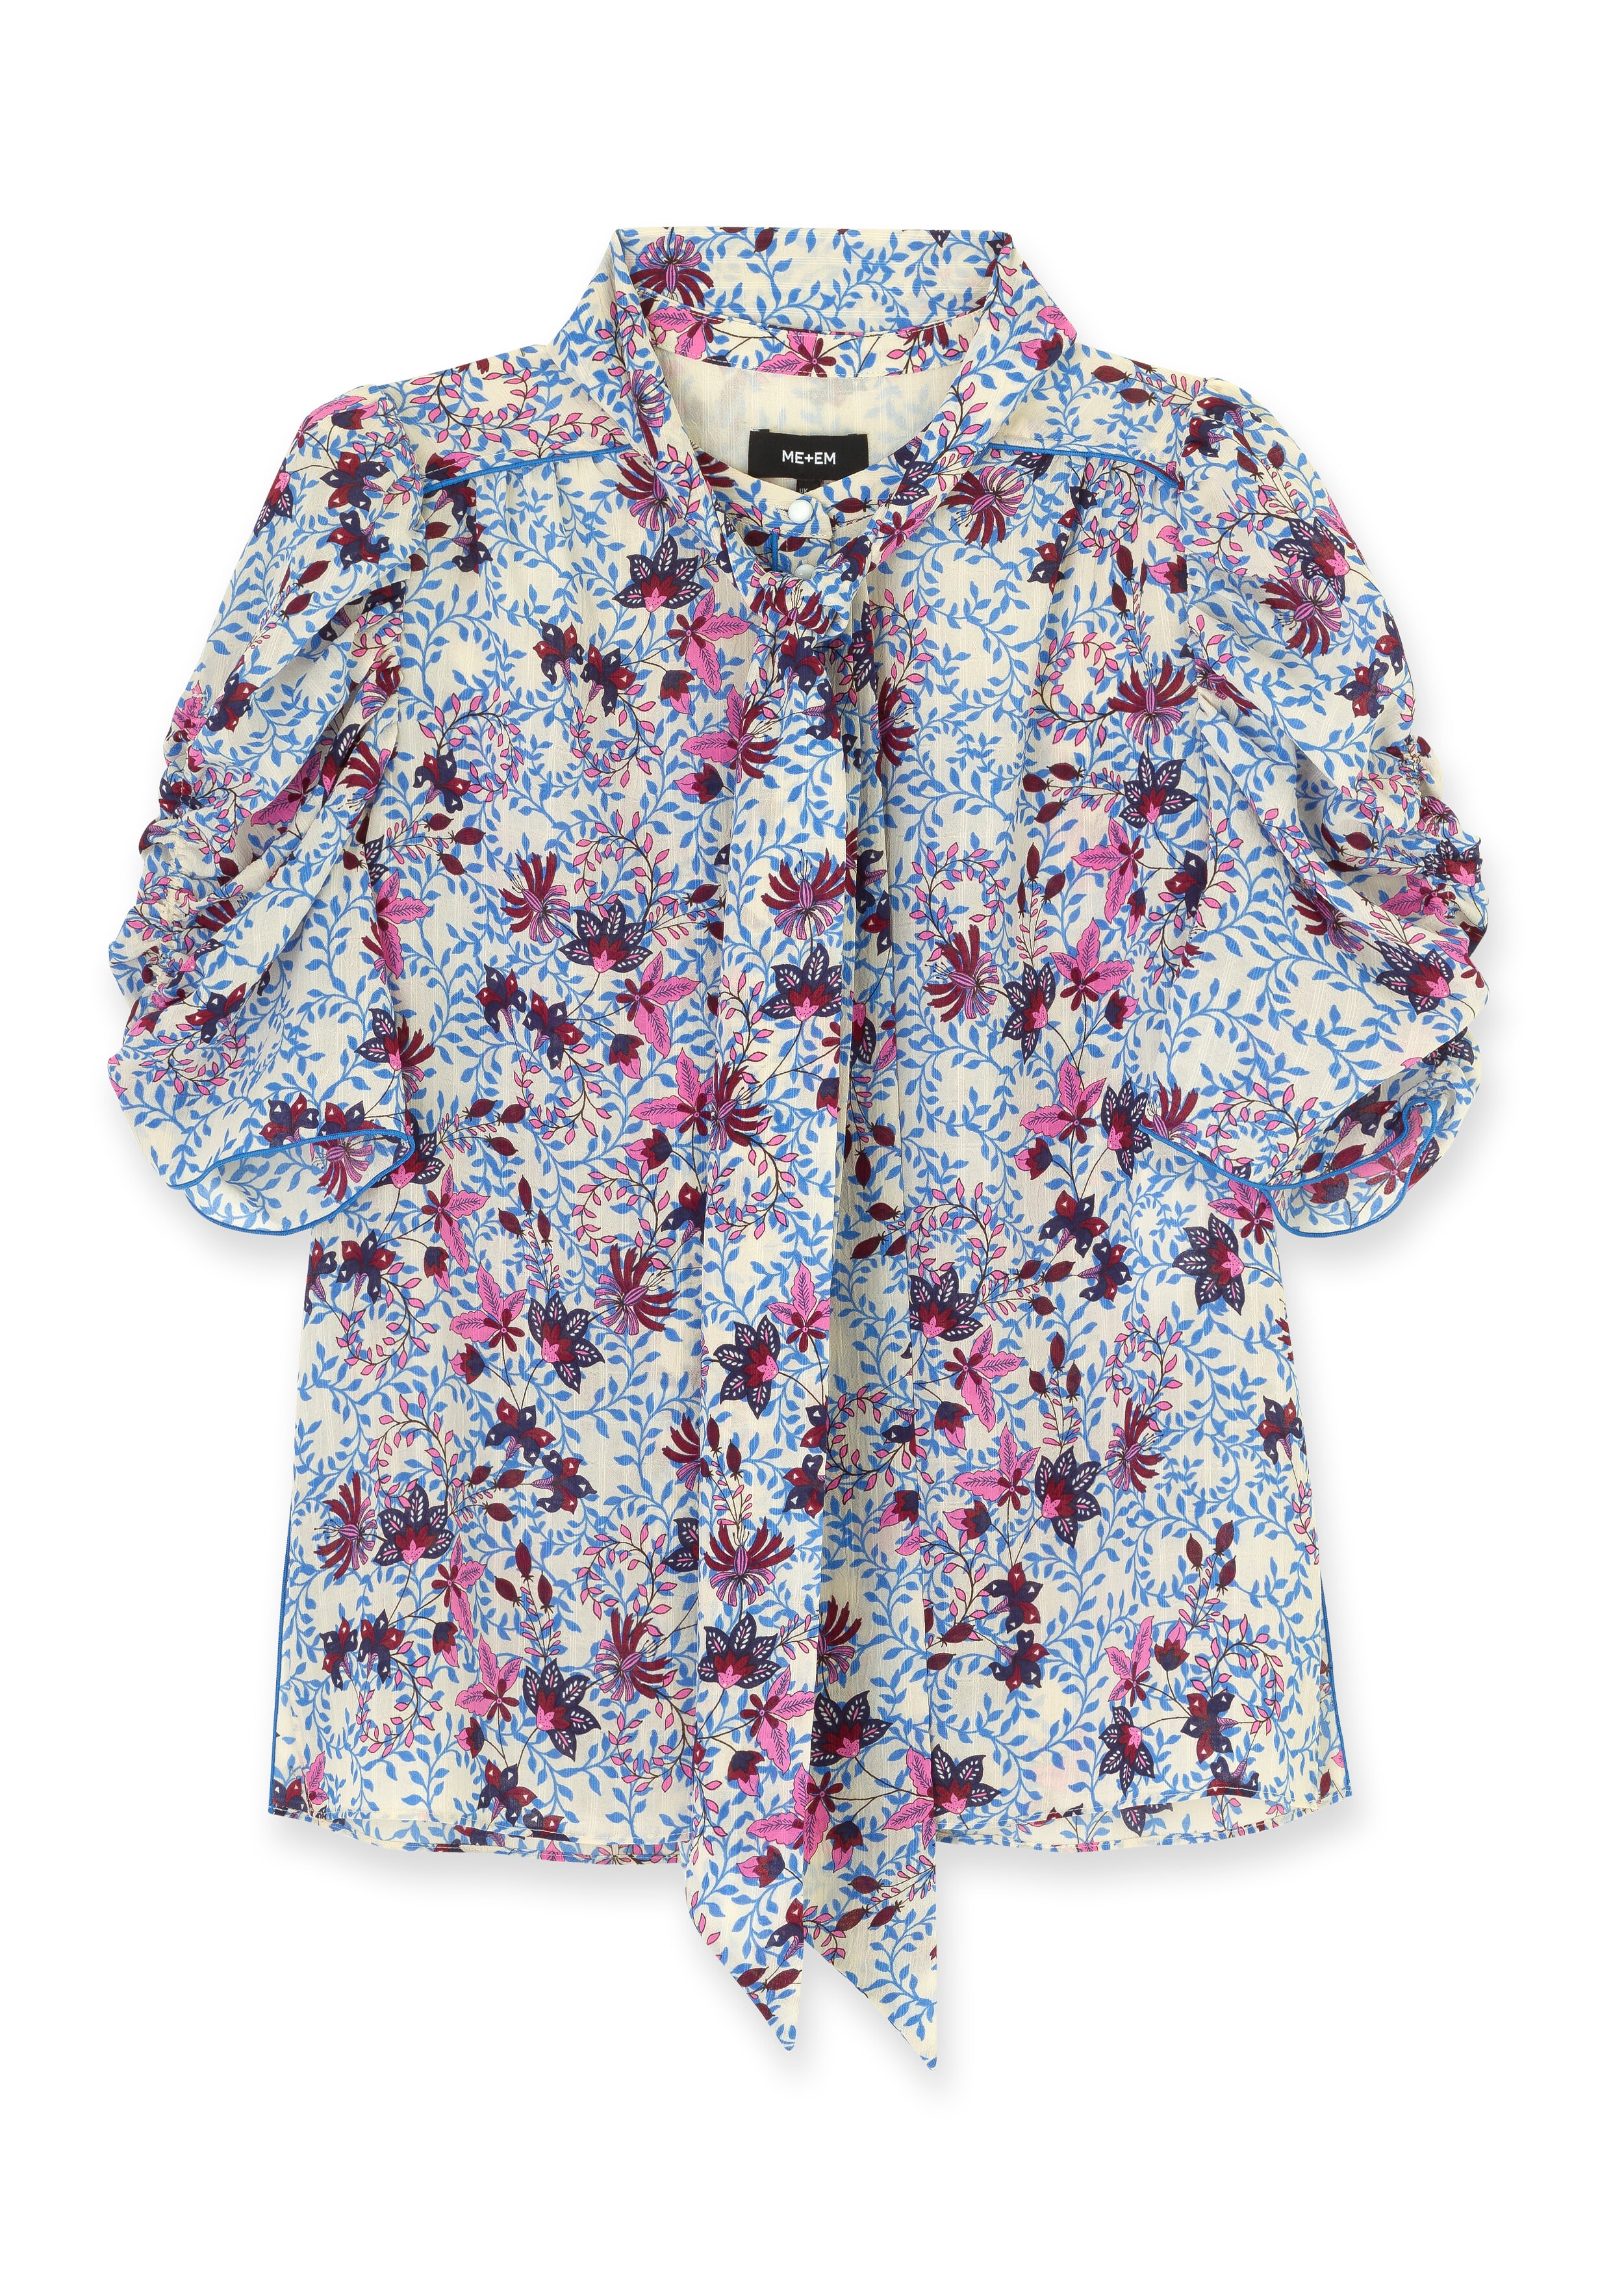 Wild Meadow Print Ruched Sleeve Blouse + Tie Cream/Blue/Pink